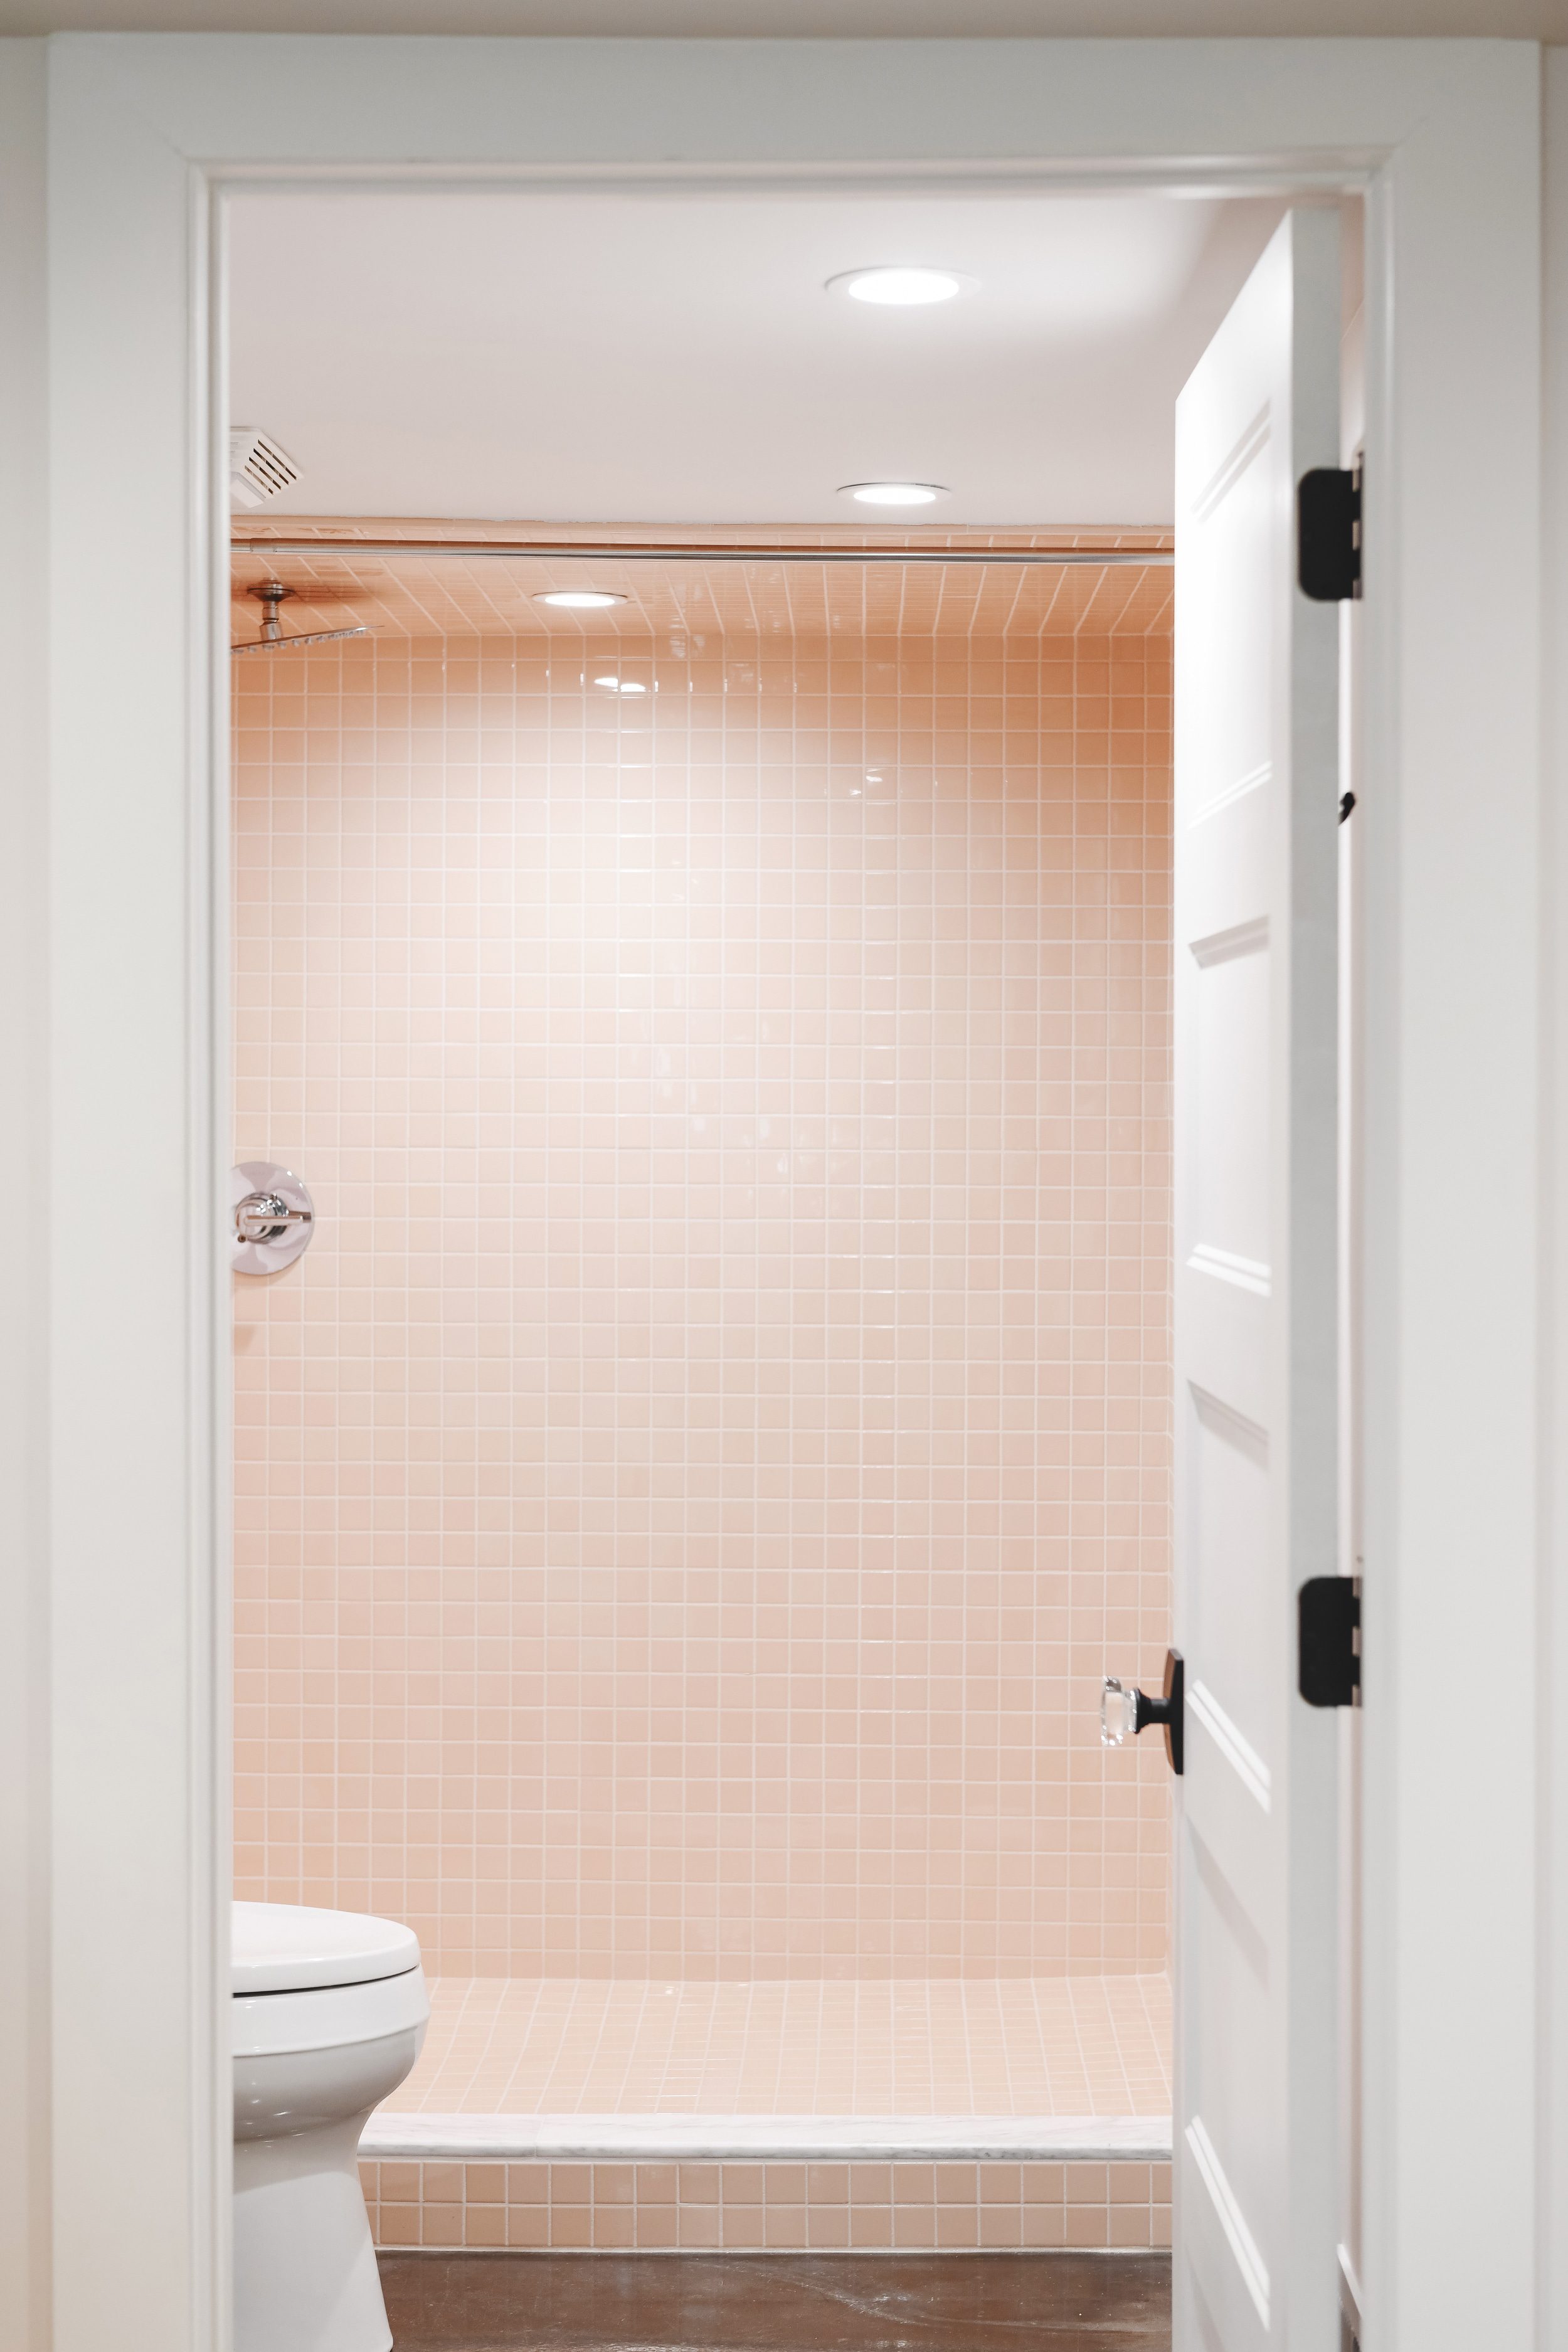 blush and white bathroom with polished concrete floors | Two Flat den bathroom before + after! | via Yellow Brick Home